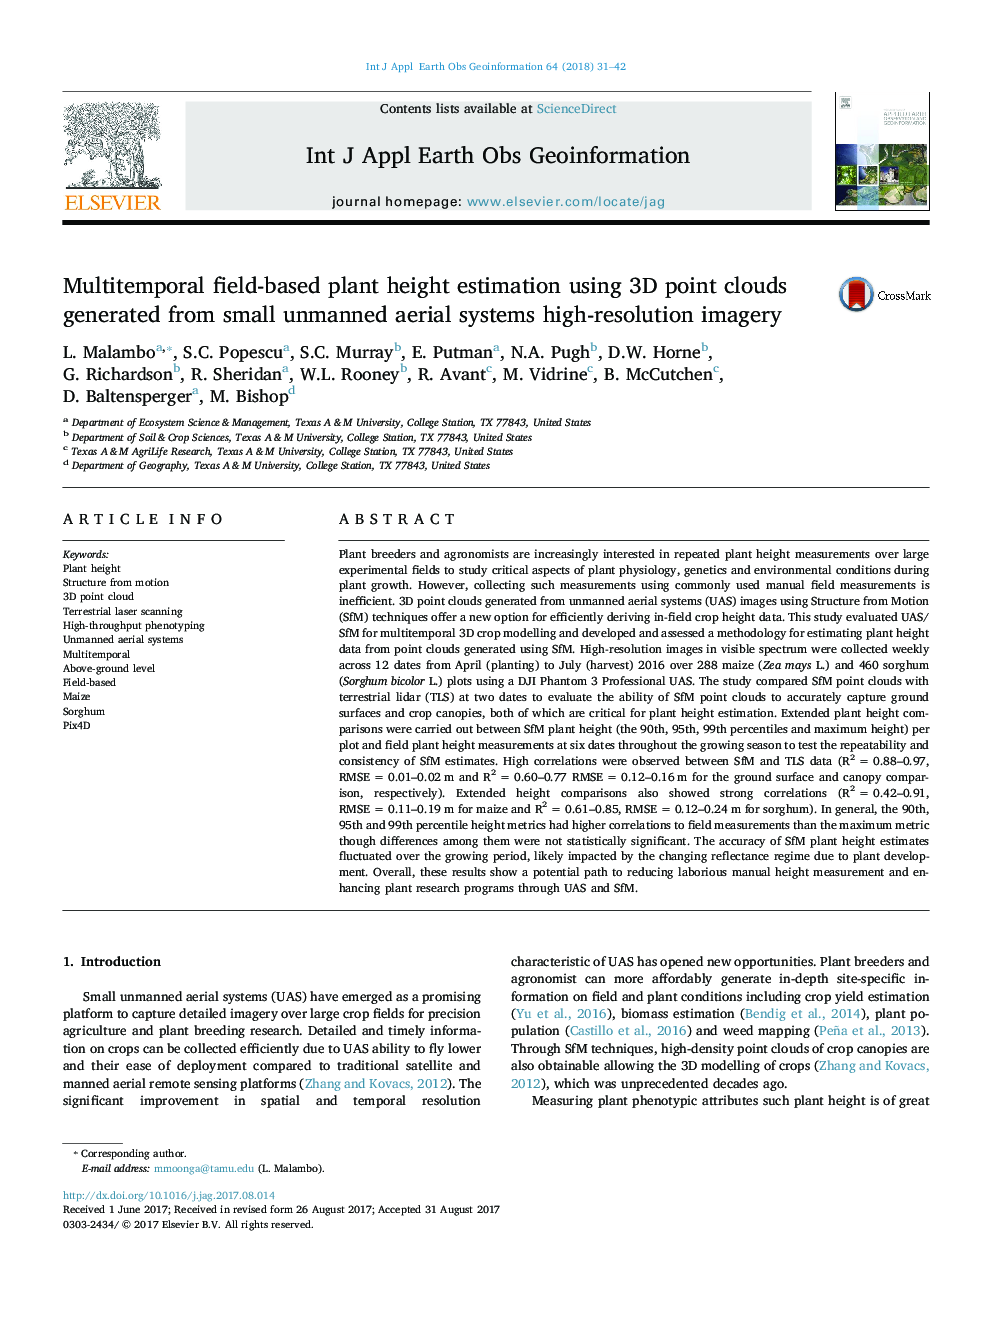 Multitemporal field-based plant height estimation using 3D point clouds generated from small unmanned aerial systems high-resolution imagery